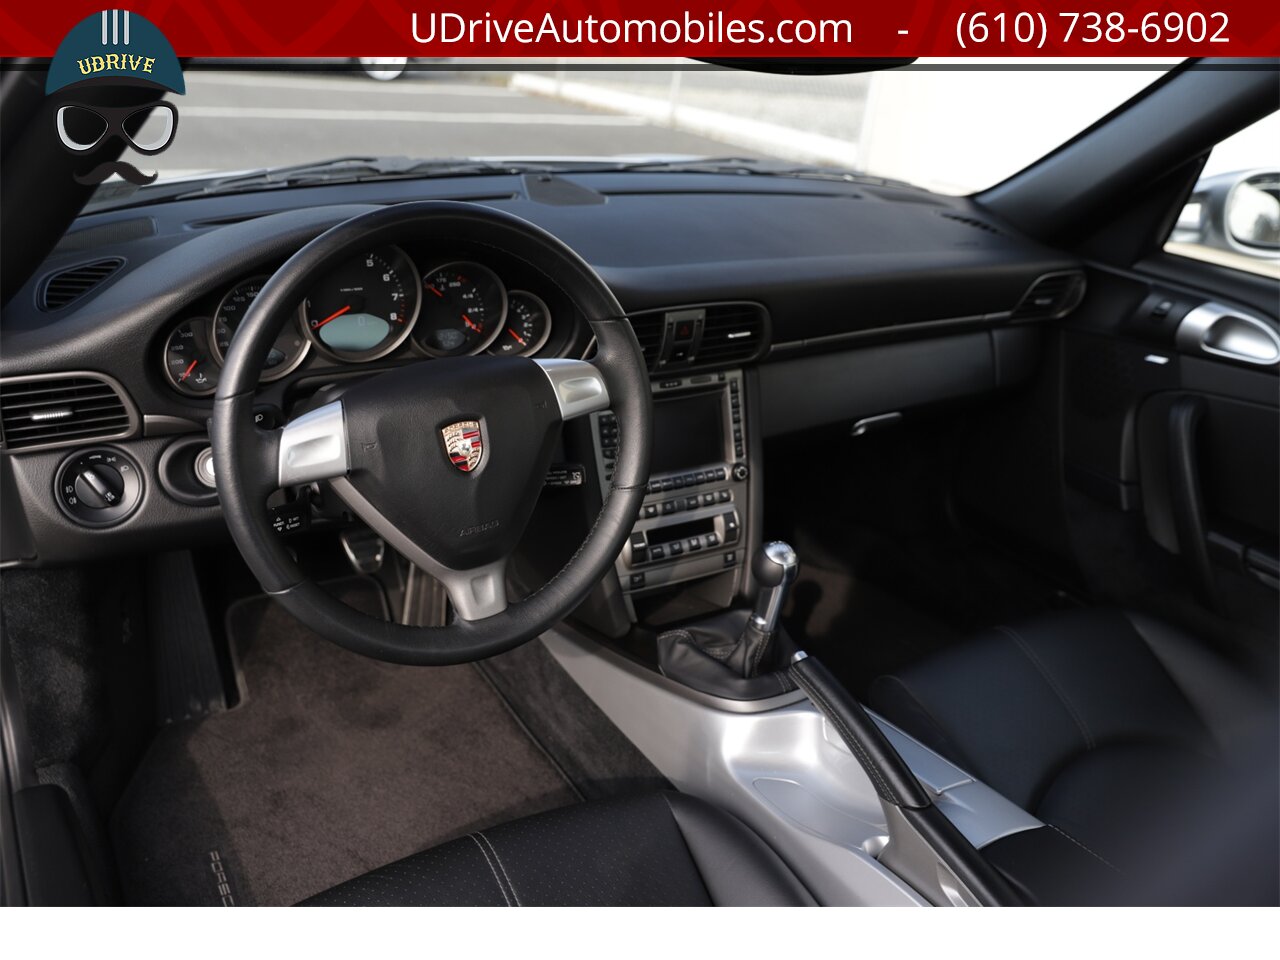 2006 Porsche 911 997 Carrera Coupe 6 Speed 19in Whls Immaculate   - Photo 27 - West Chester, PA 19382